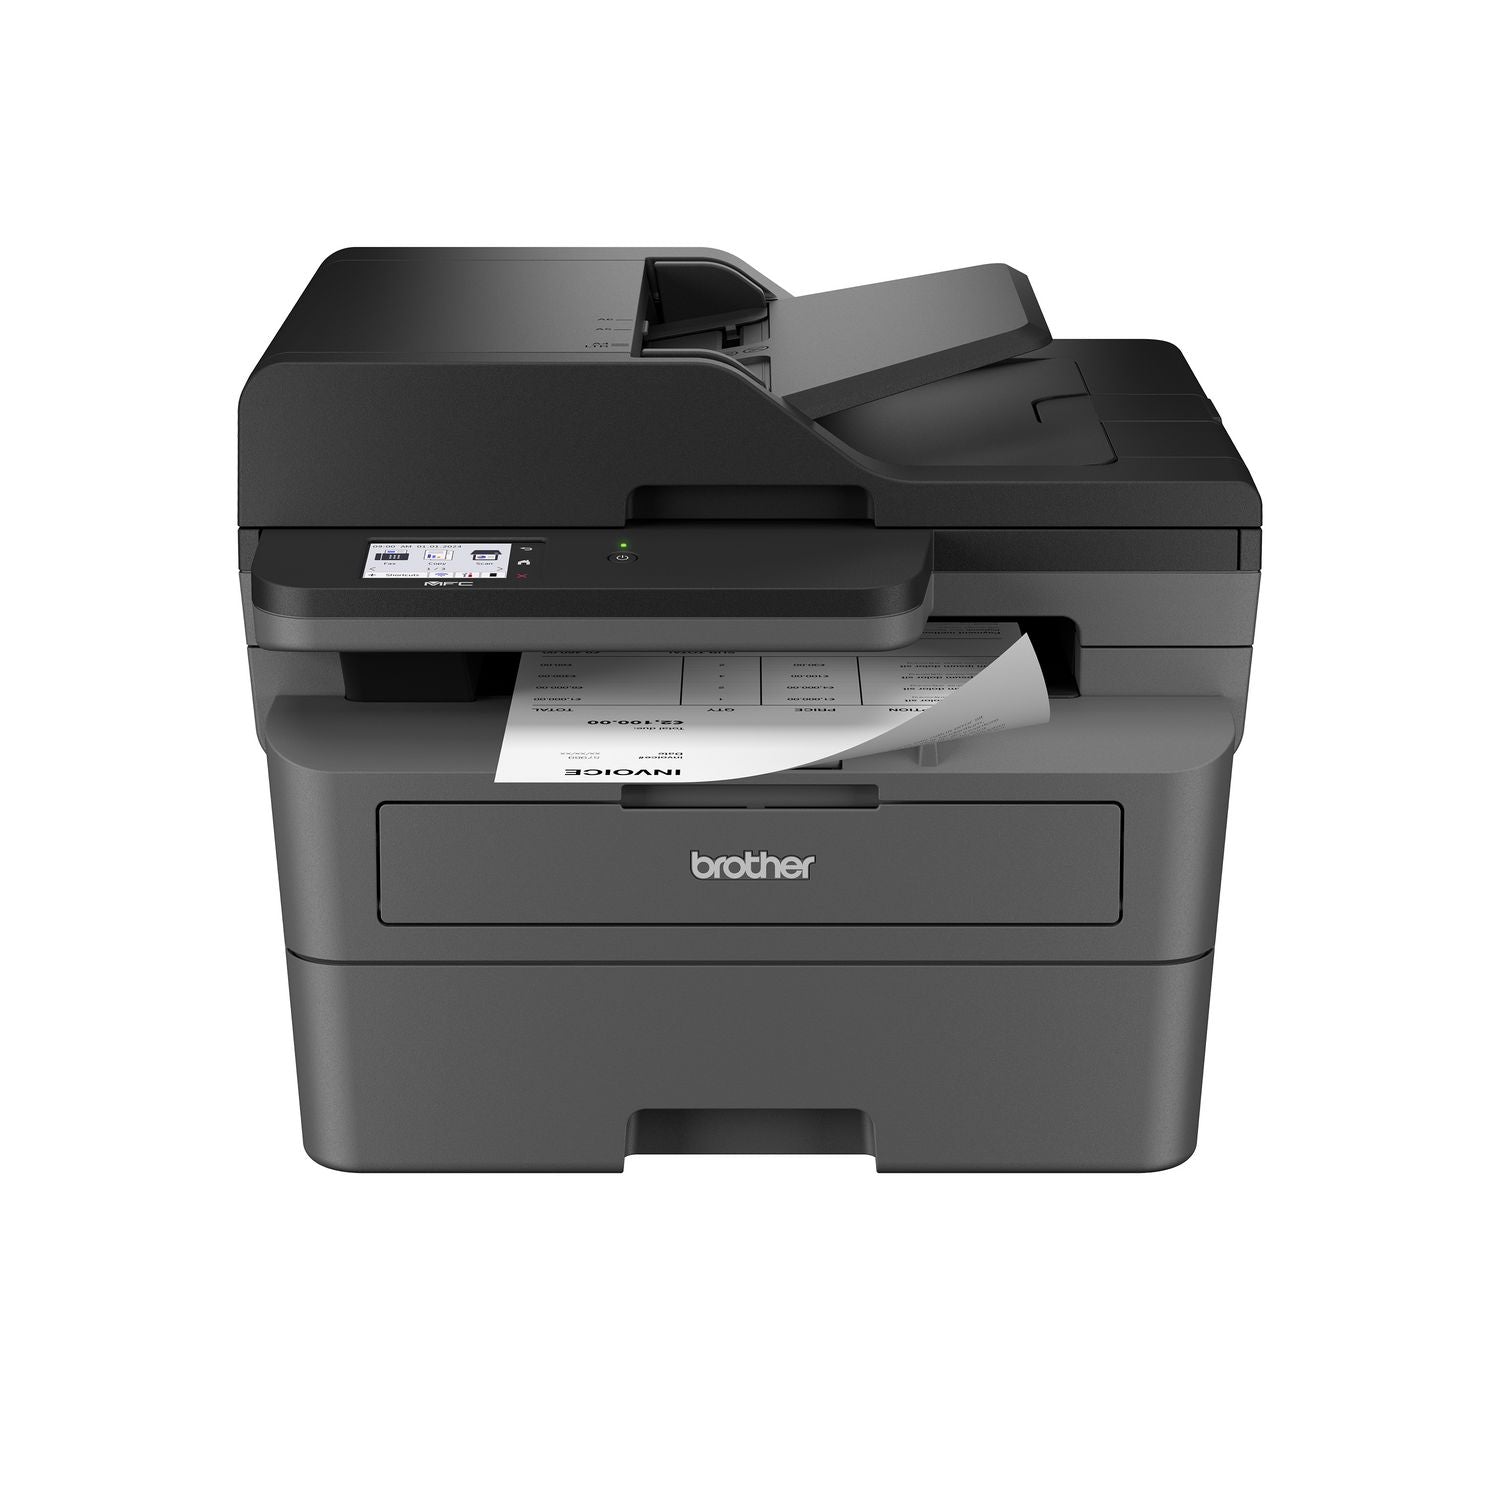 mfc-l2820dw-wireless-compact-monochrome-all-in-one-laser-printer-copy-fax-print-scan_brtmfcl2820dw - 1